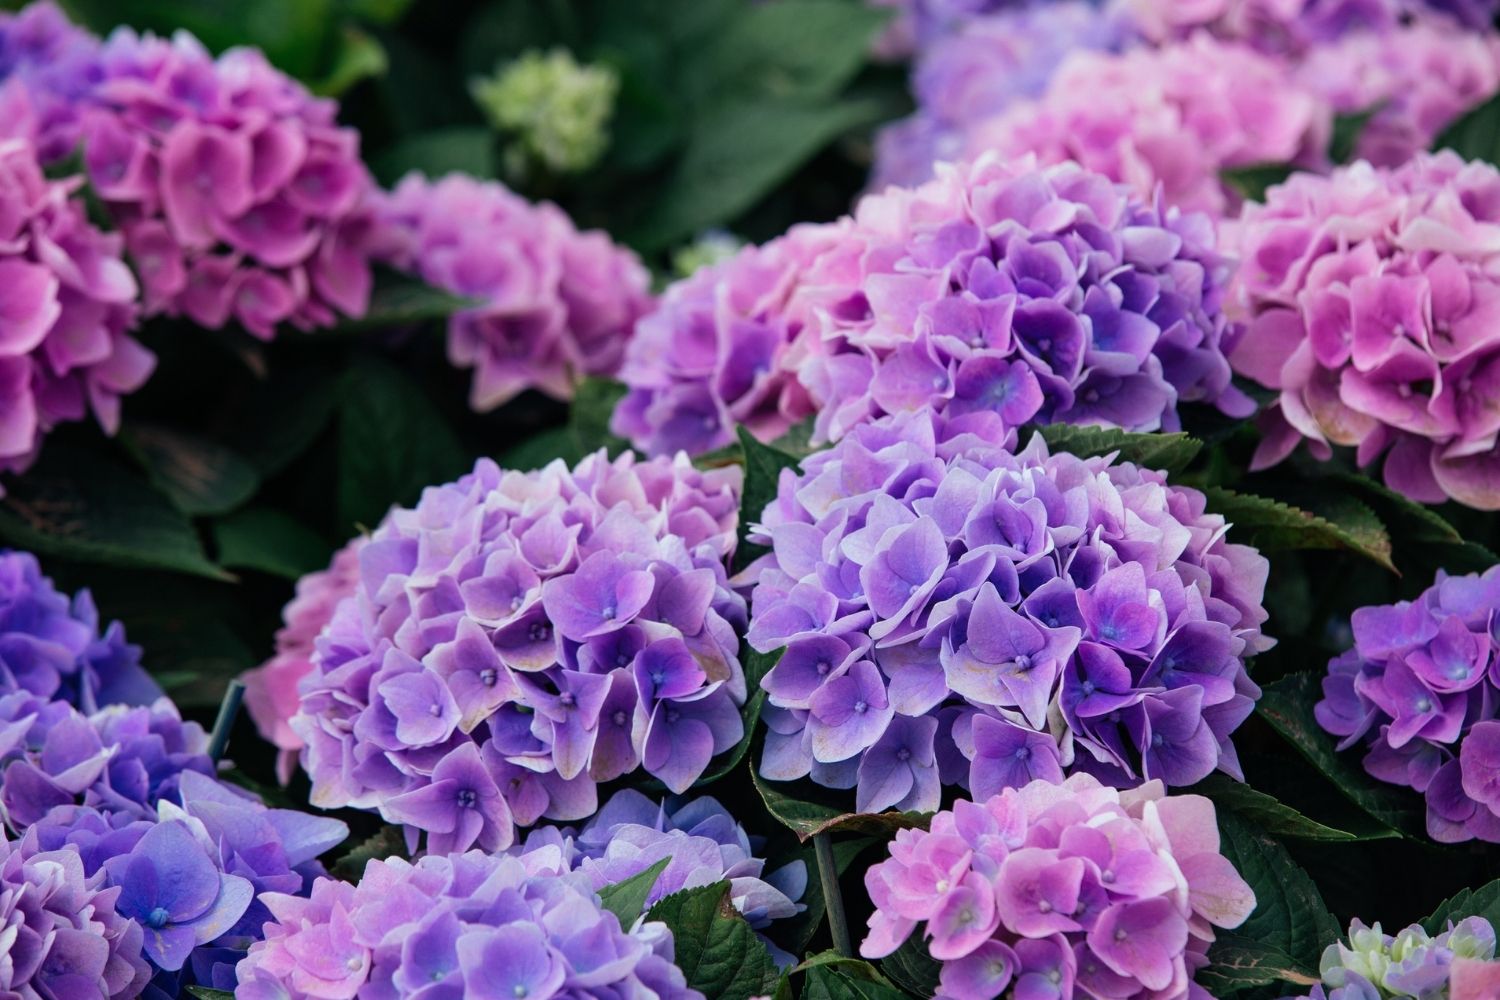 Hydrangea basics: how to grow and care for them | Better Homes and Gardens